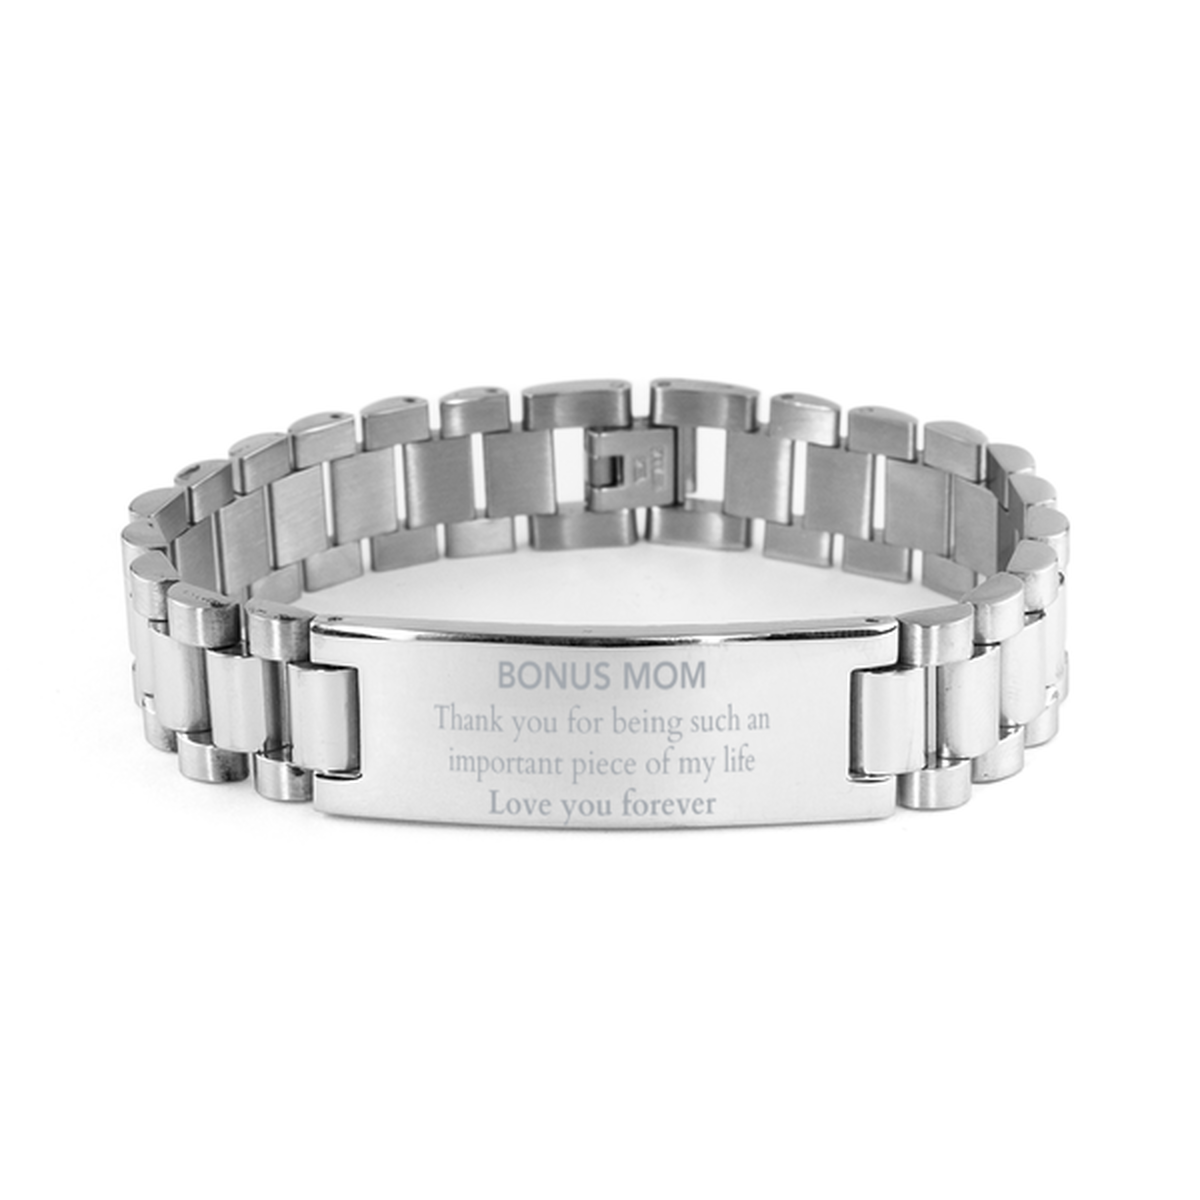 Appropriate Bonus Mom Ladder Stainless Steel Bracelet Epic Birthday Gifts for Bonus Mom Thank you for being such an important piece of my life Bonus Mom Christmas Mothers Fathers Day